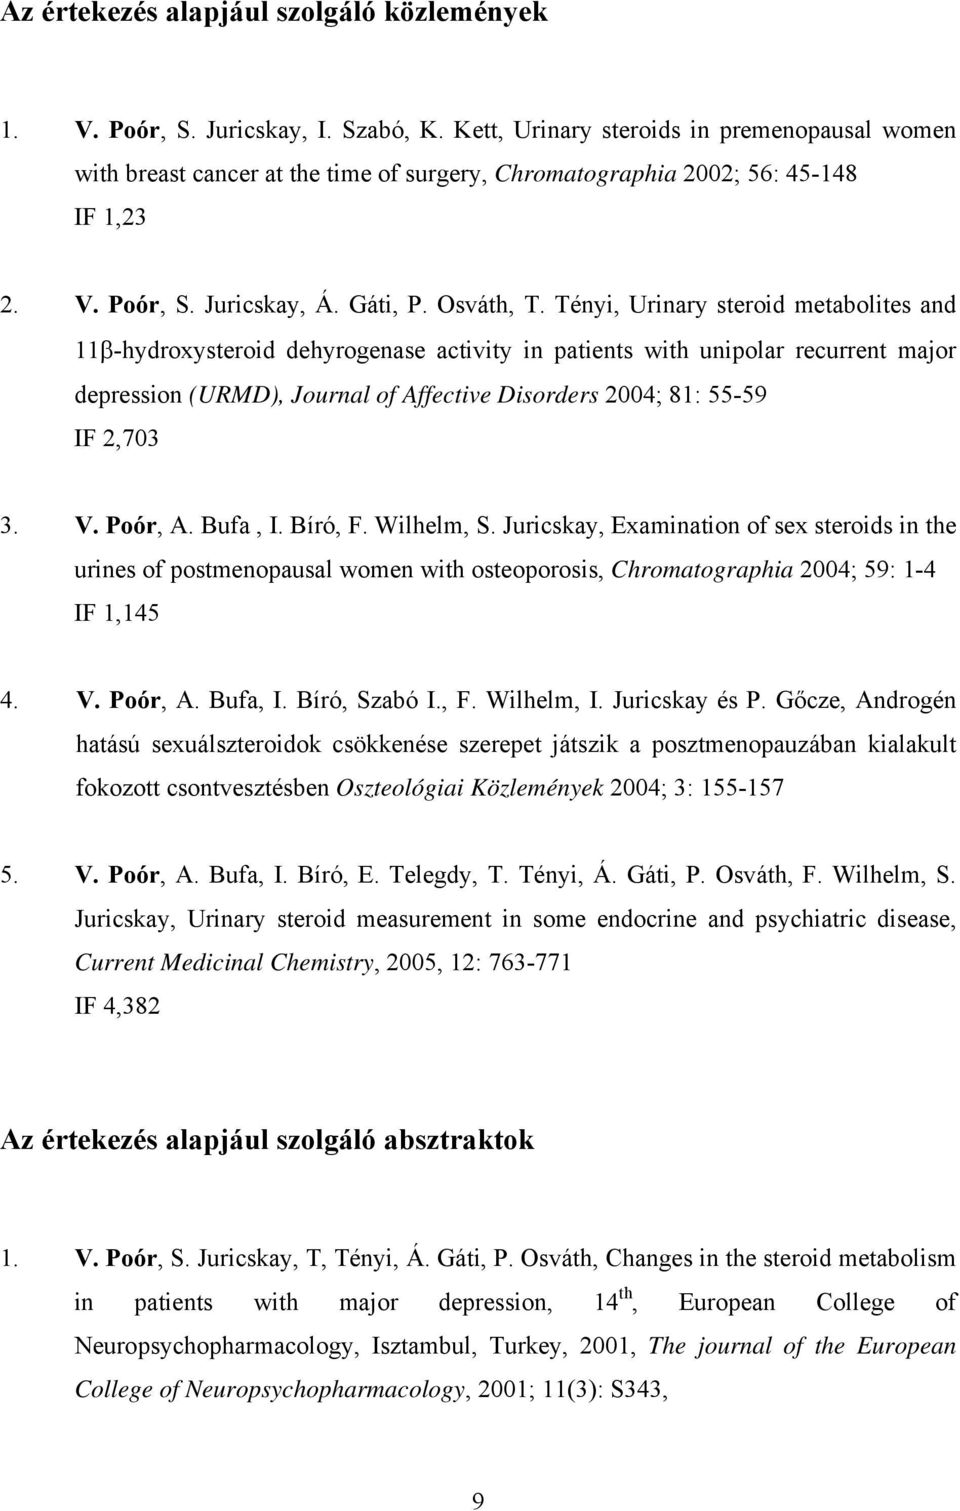 Tényi, Urinary steroid metabolites and 11β-hydroxysteroid dehyrogenase activity in patients with unipolar recurrent major depression (URMD), Journal of Affective Disorders 2004; 81: 55-59 IF 2,703 3.